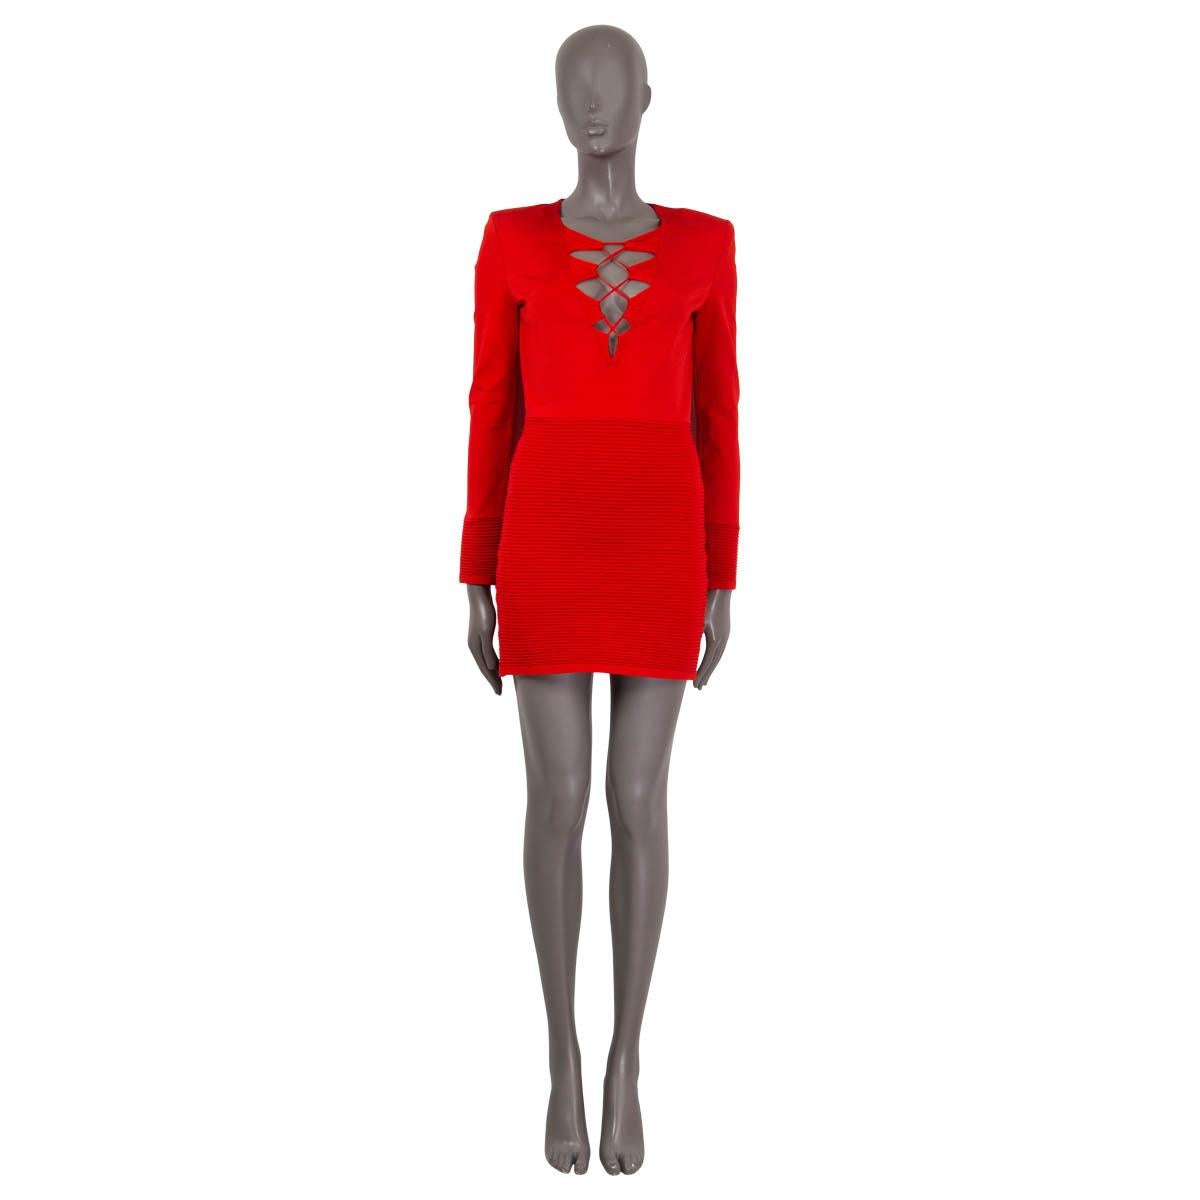 100% authentic Balmain long sleeve dress in red viscose (81%), polyamide (17%) and elastane (2%). Features lace-up detail at the deep v-neck and padded shoulders. Opens with a golden zipper on the back. Unlined. Has been worn and is in excellent